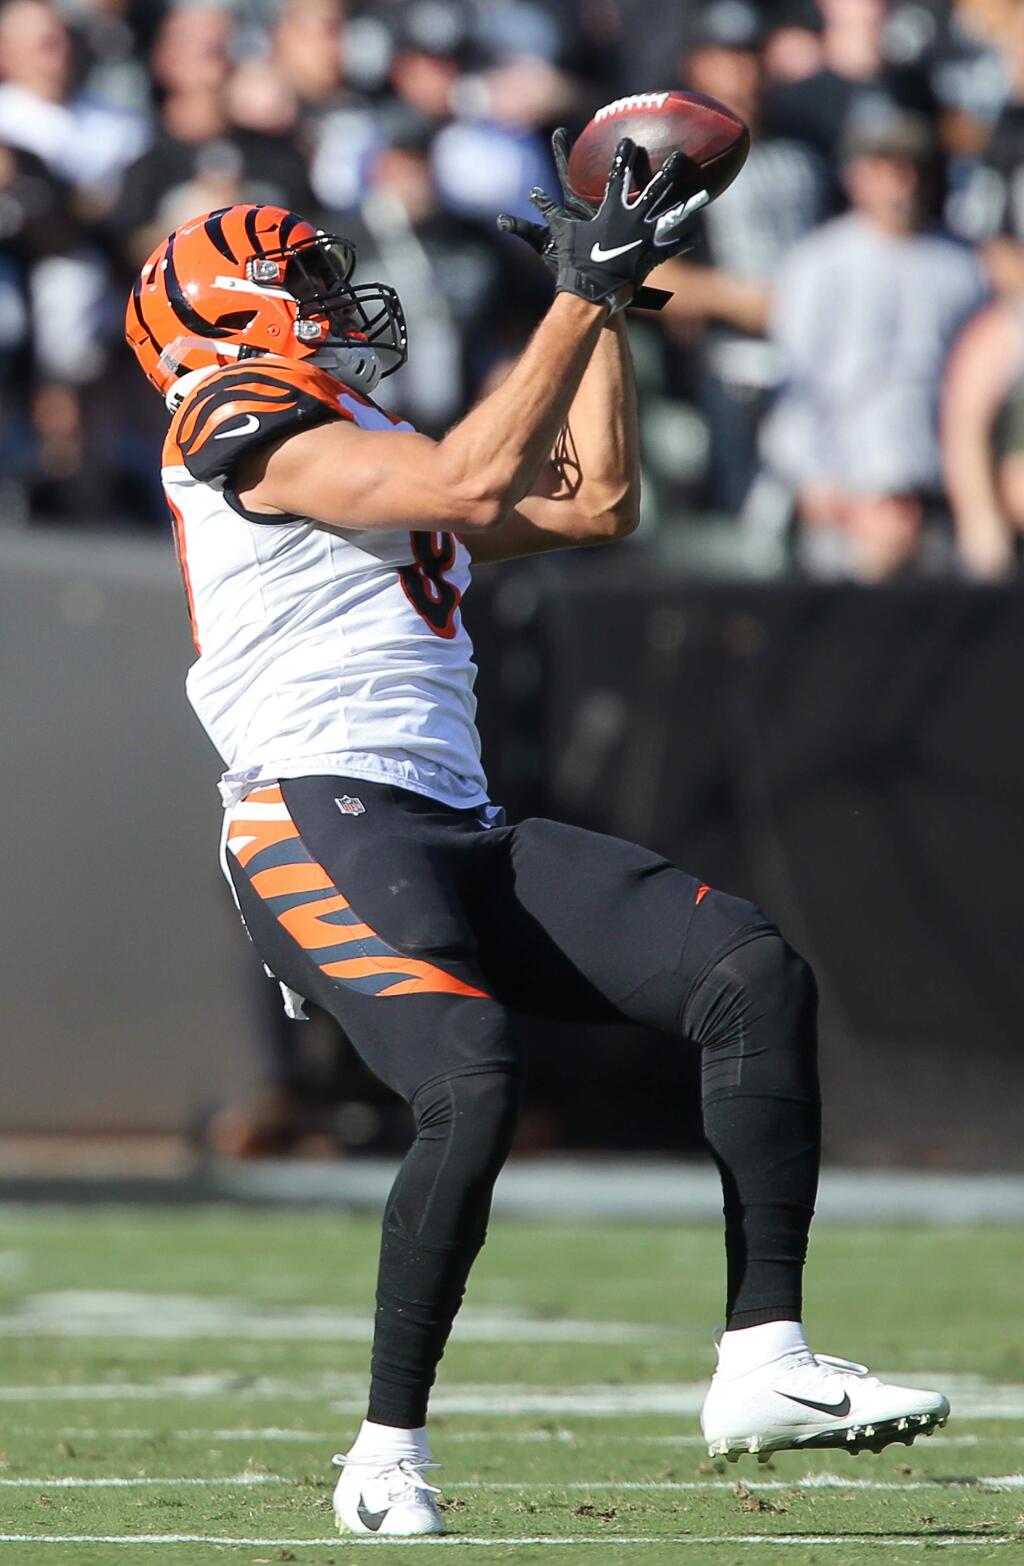 Cincinnati Bengals tight end C.J. Uzomah bobbles the ball during a catch against the Oakland Raiders, during their game in Oakland on Sunday, November 17, 2019. (Christopher Chung/ The Press Democrat)